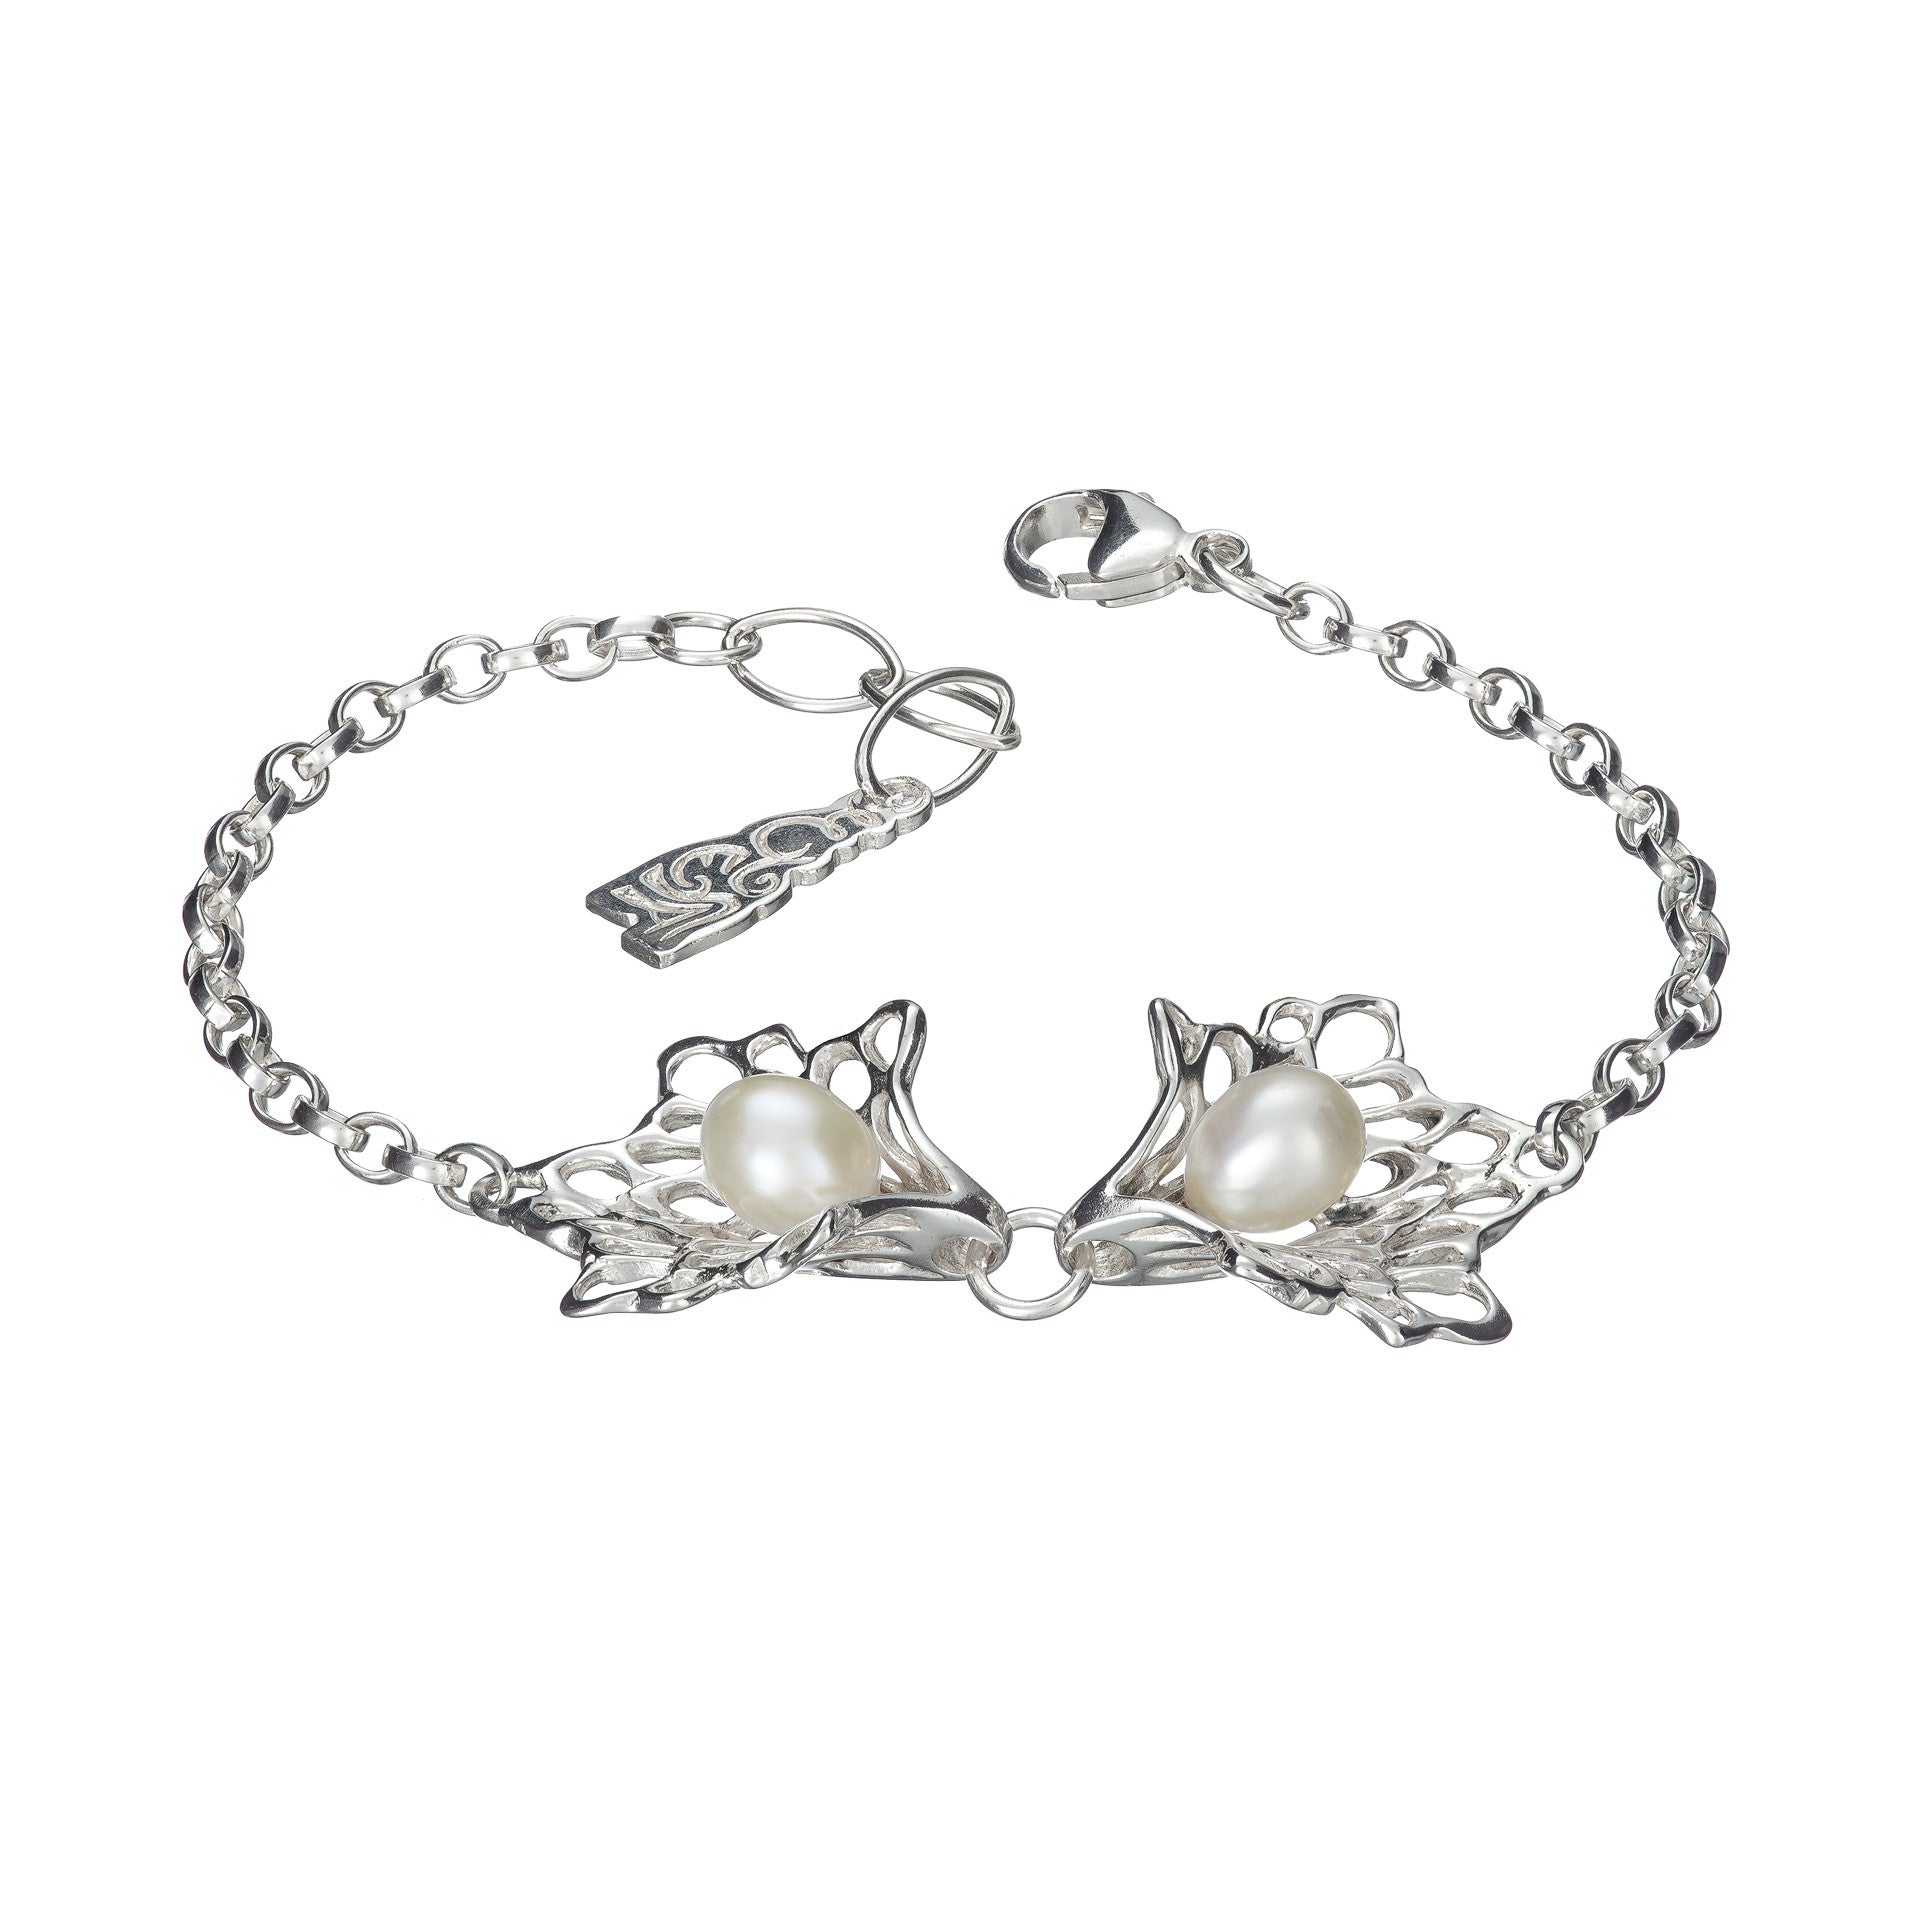 Petals & Pearls Gossamer Bracelet handcrafted from Sterling Silver by Elena.